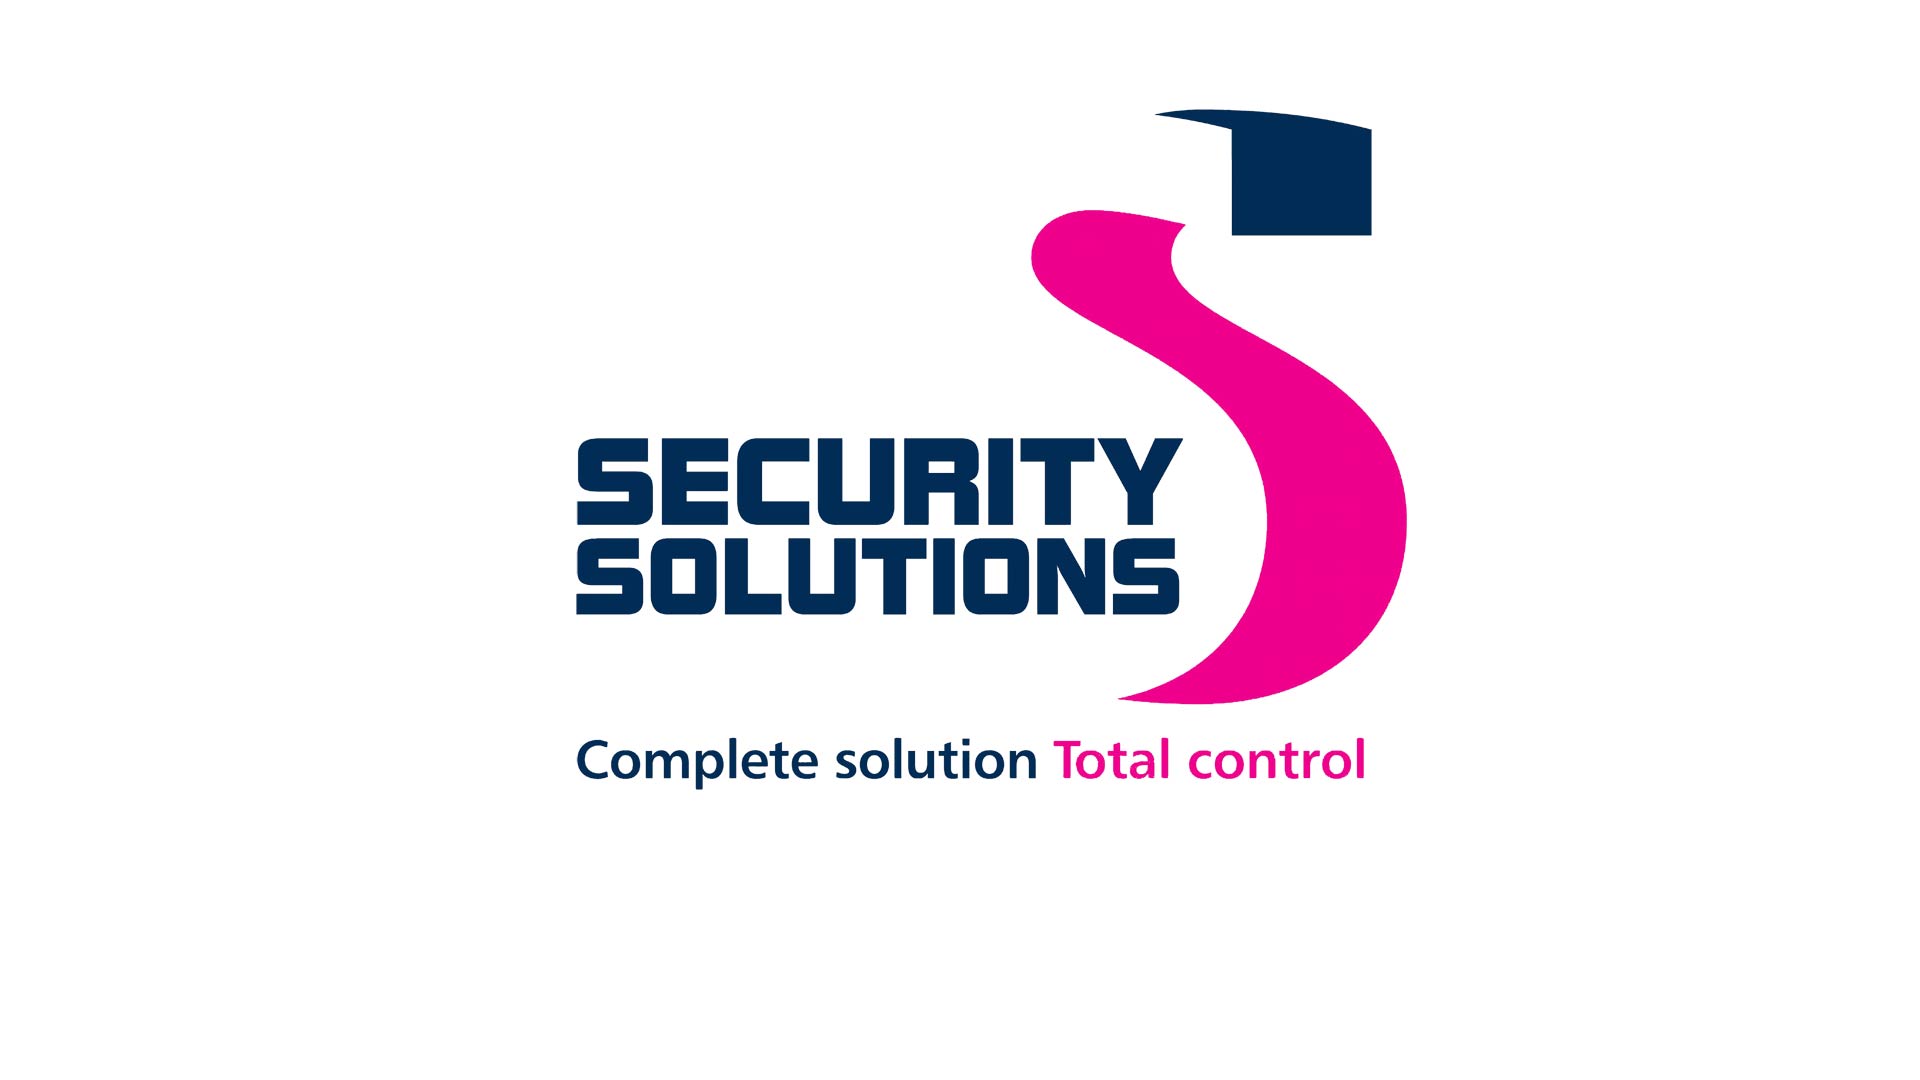 Security Solutions Logo